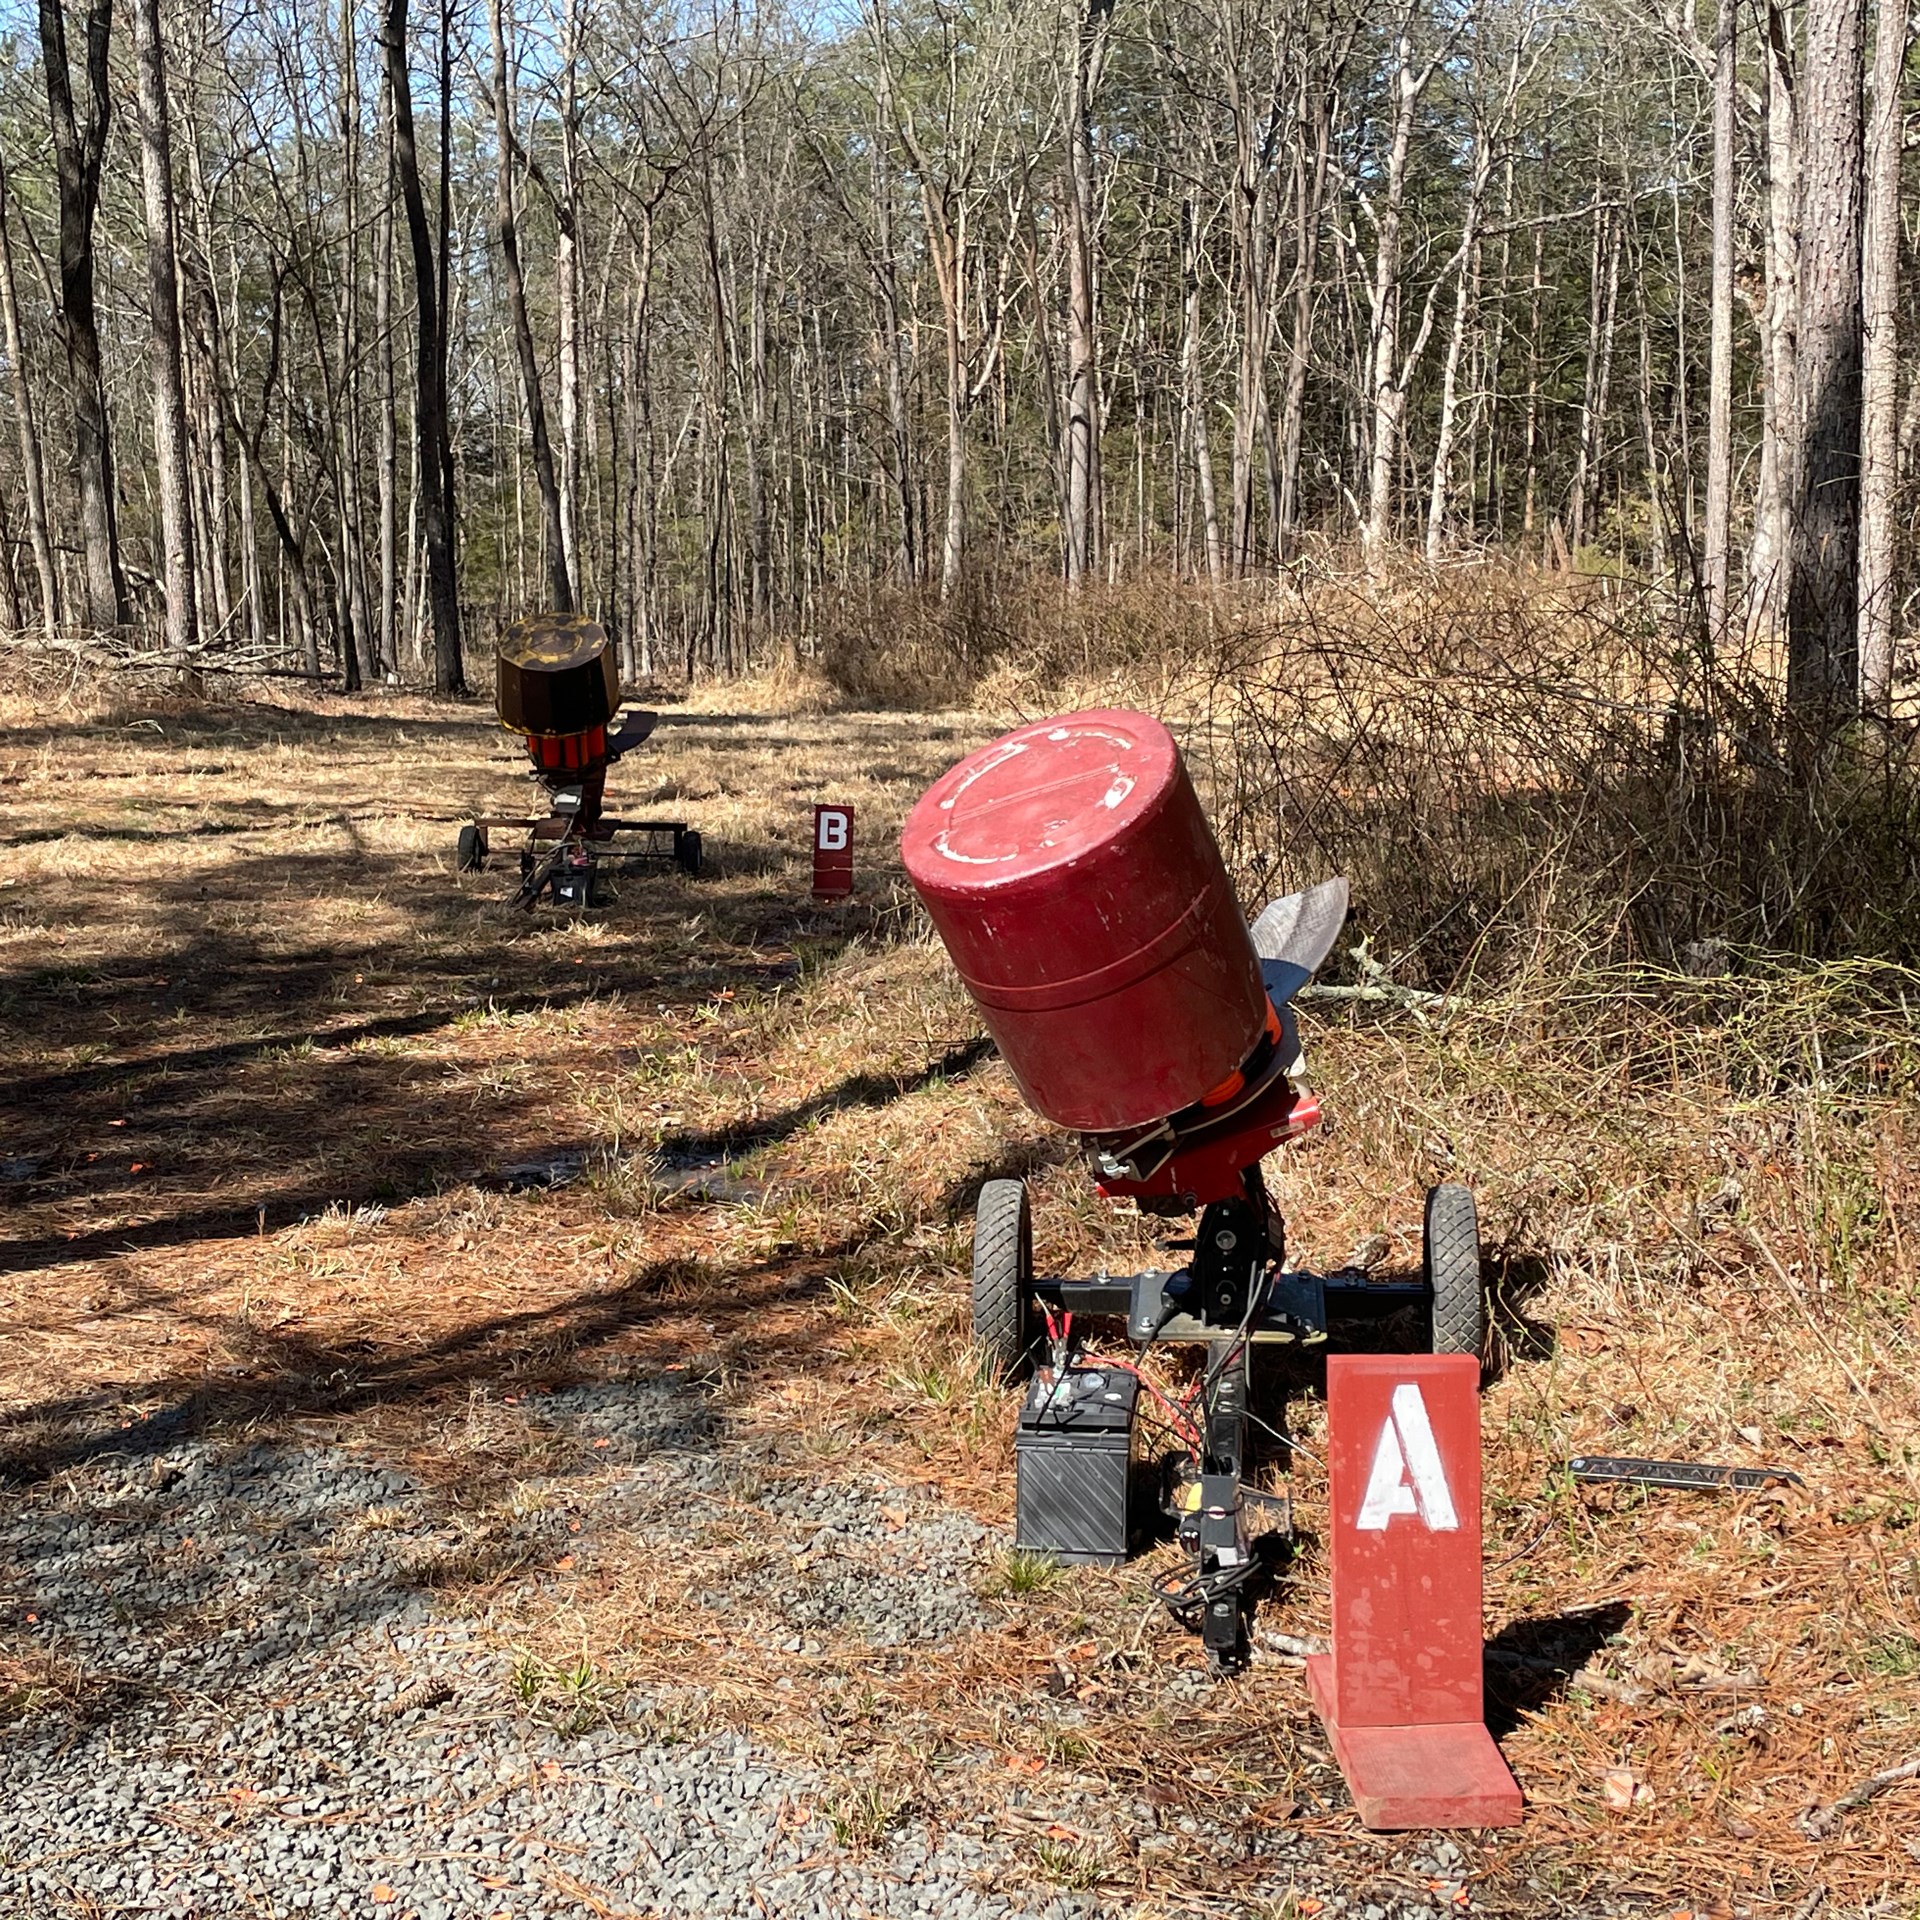 A and B clay target machines throwers shown from behind in forest setting shadows trees leaves grass gravel